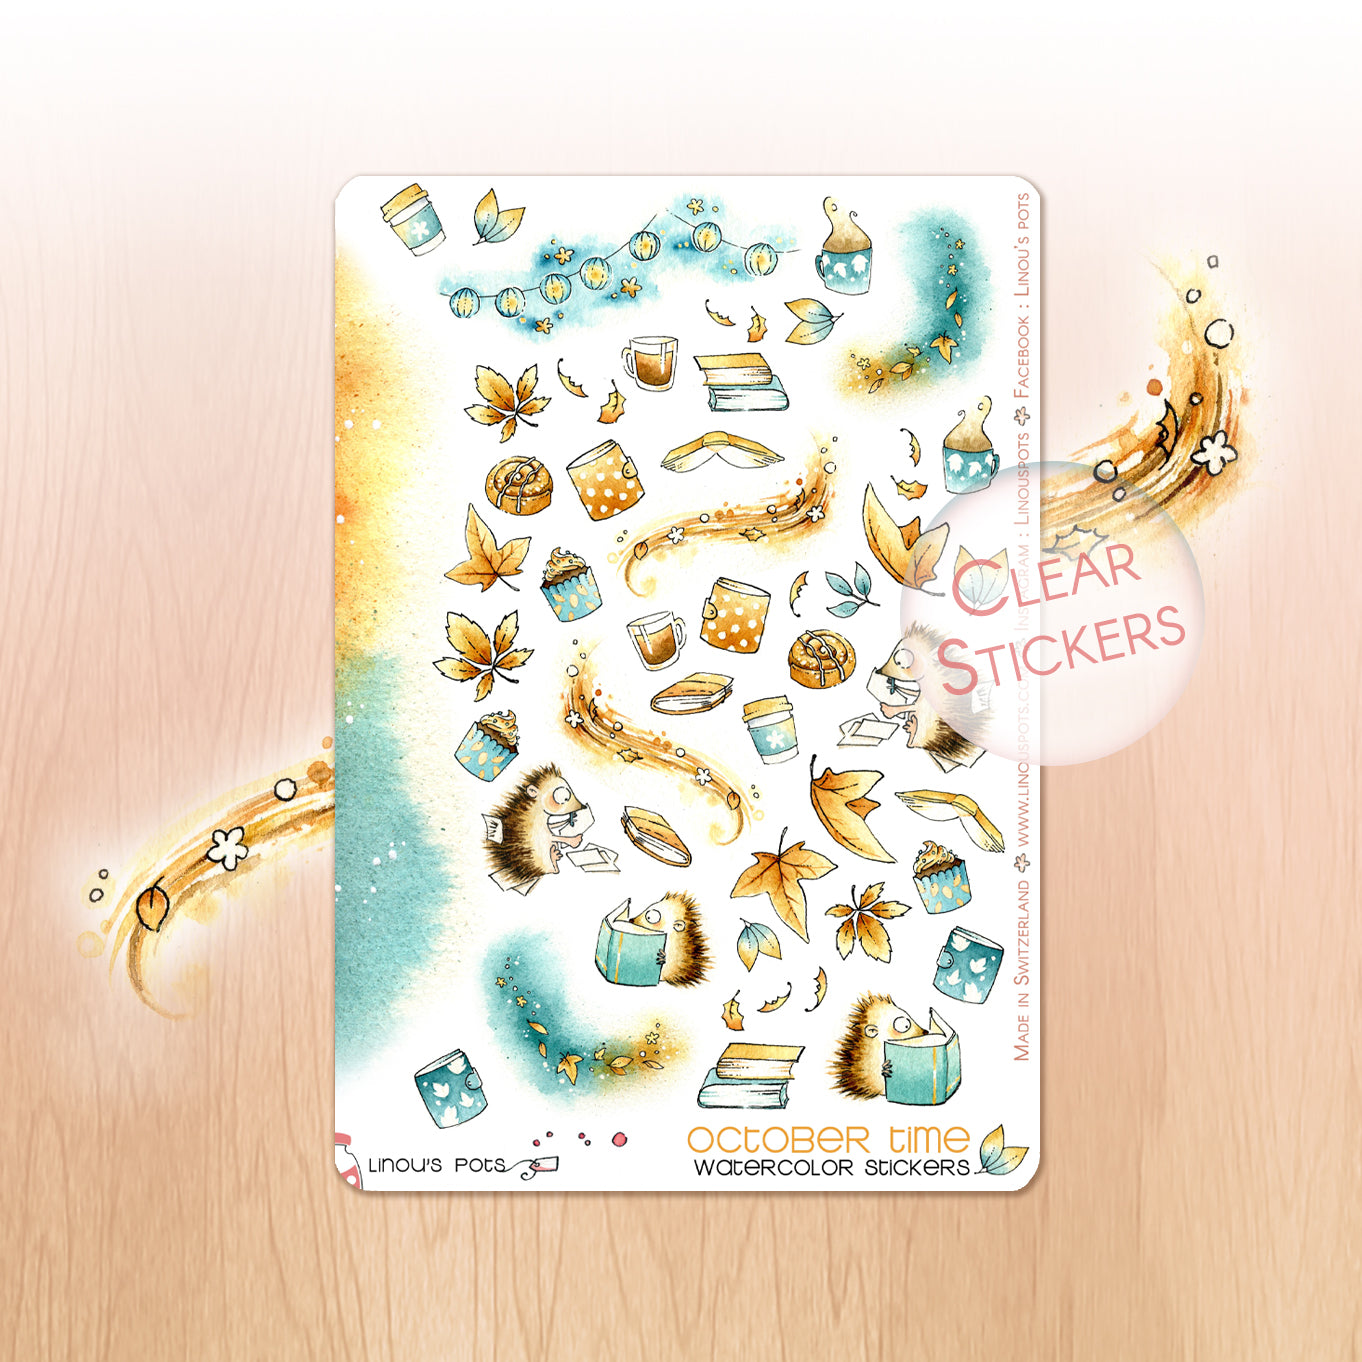 Watercolor stickers with hedgehogs und fall leaves